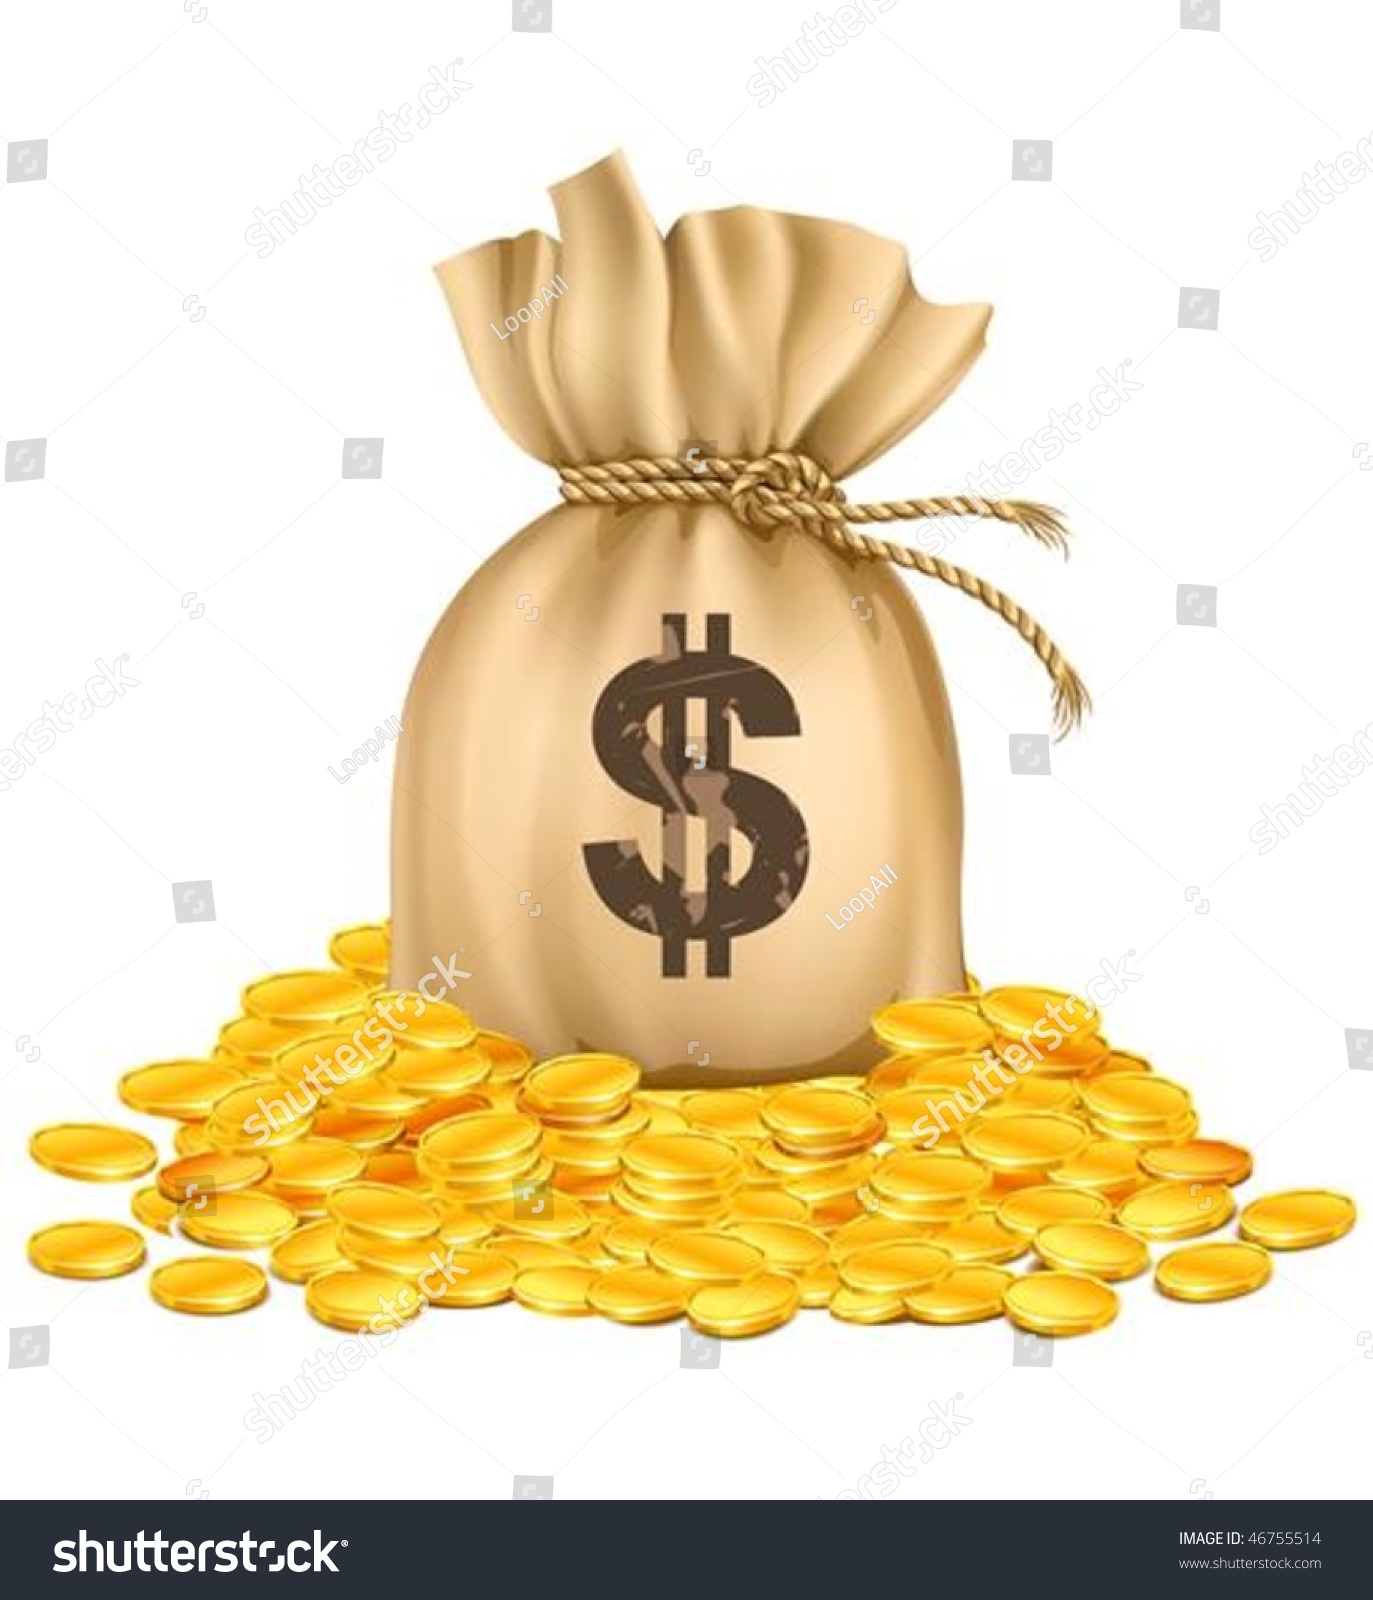 pile of money clipart free - photo #34